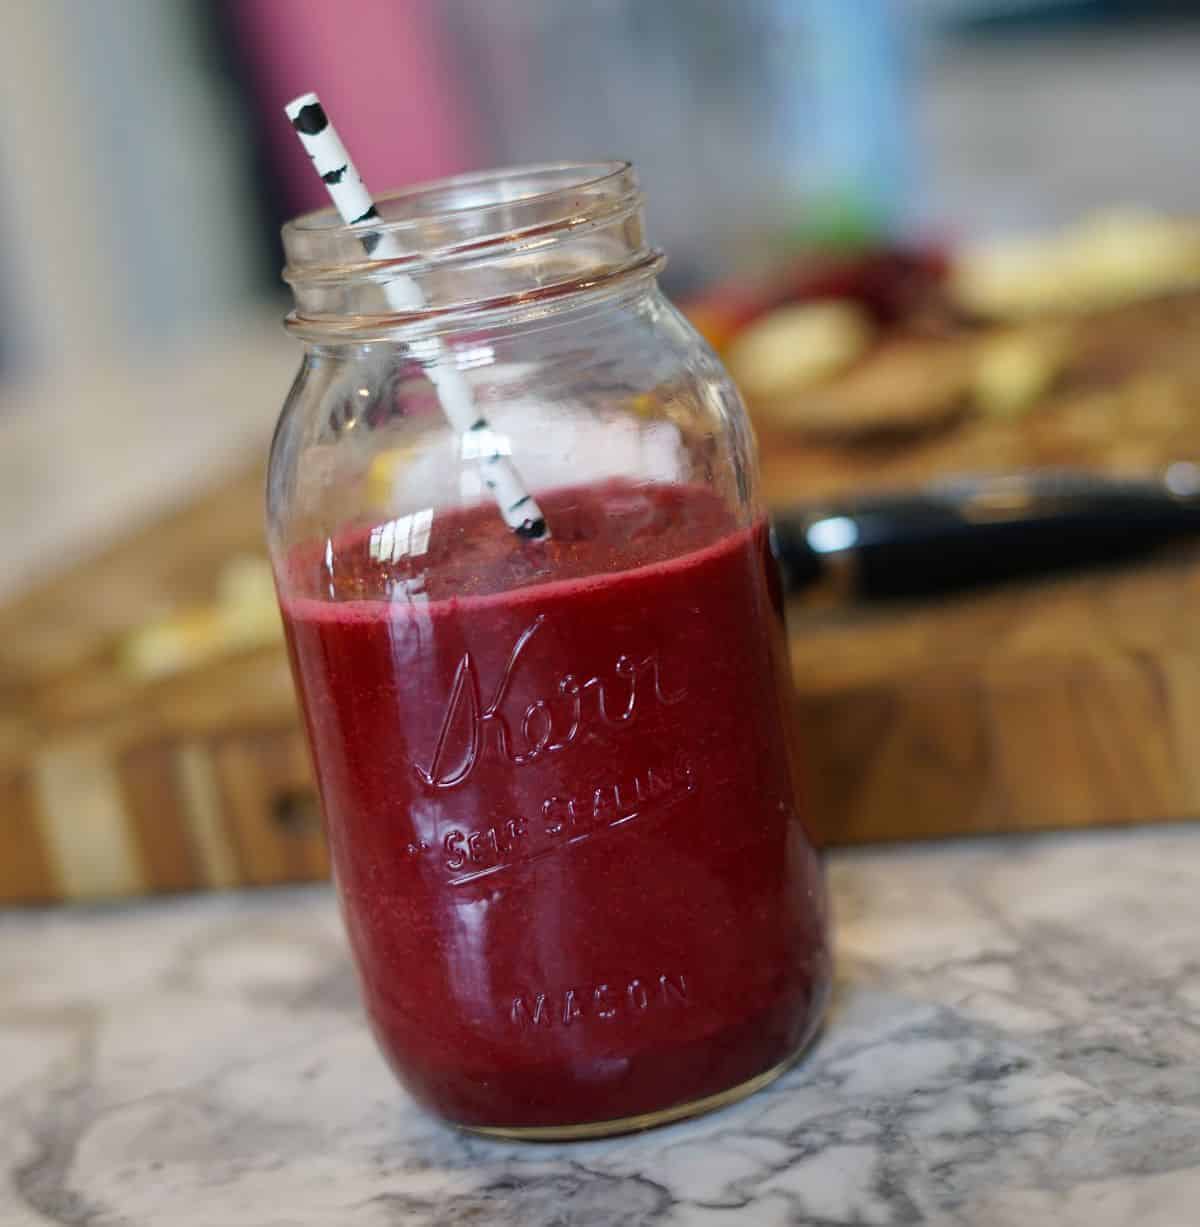 Red smoothie in a mason jar with a wooden cutting board and fruit scraps in the background.